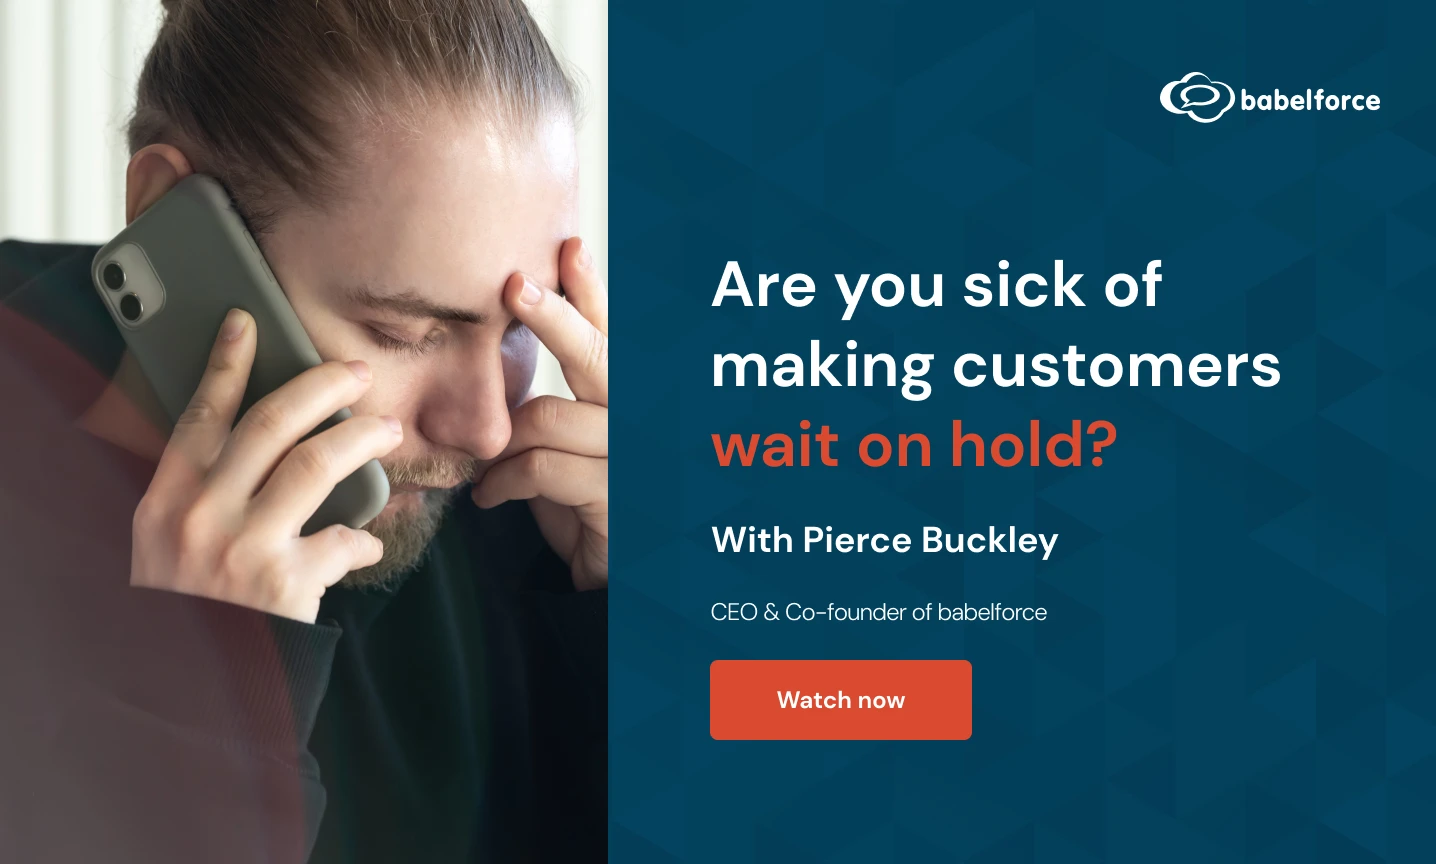 Are you sick of making customers wait on hold?